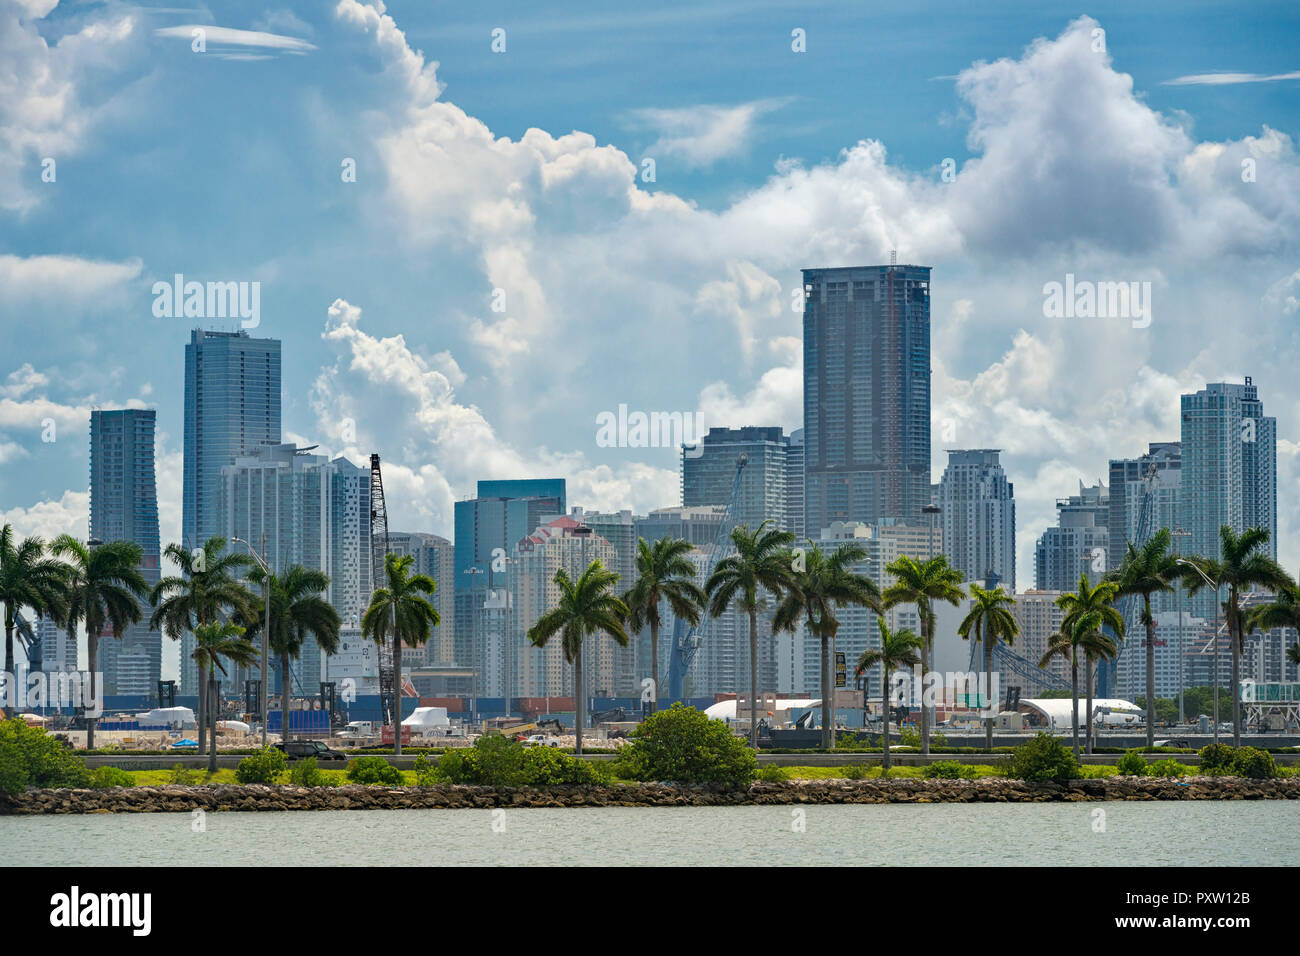 United States of America, Florida, Miami, Downtown,  skyline with high-rises in Miami Downtown and palm trees with clouds above Stock Photo